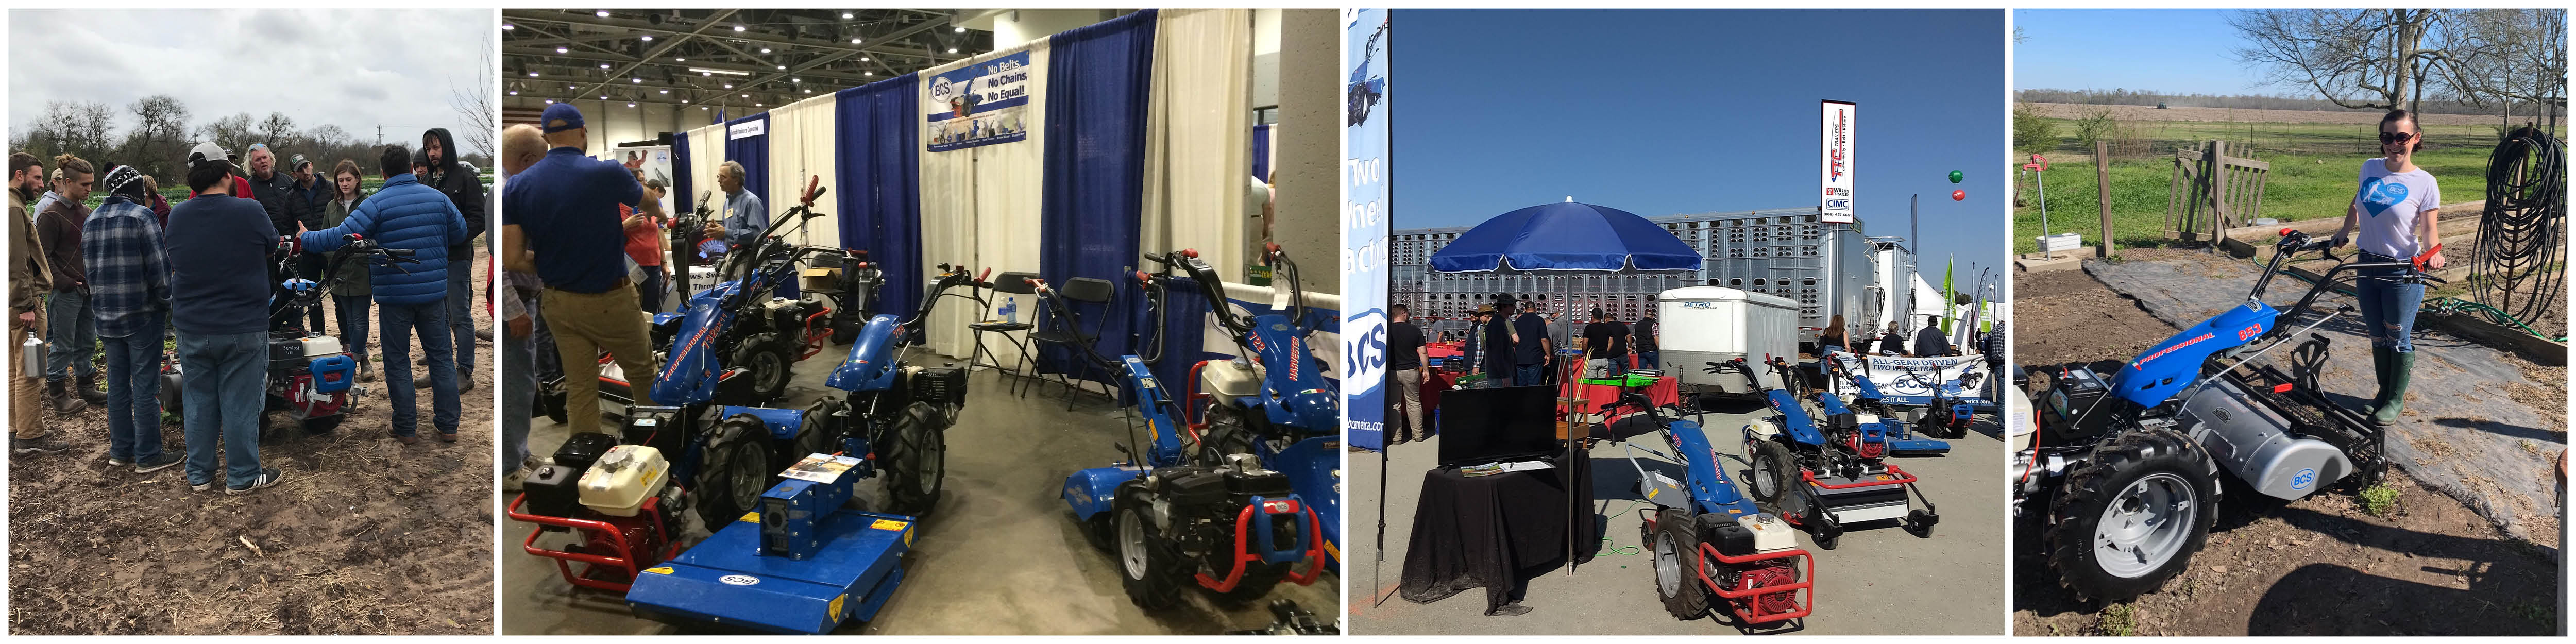 See BCS at Upcoming Trade Shows & Events in January & February